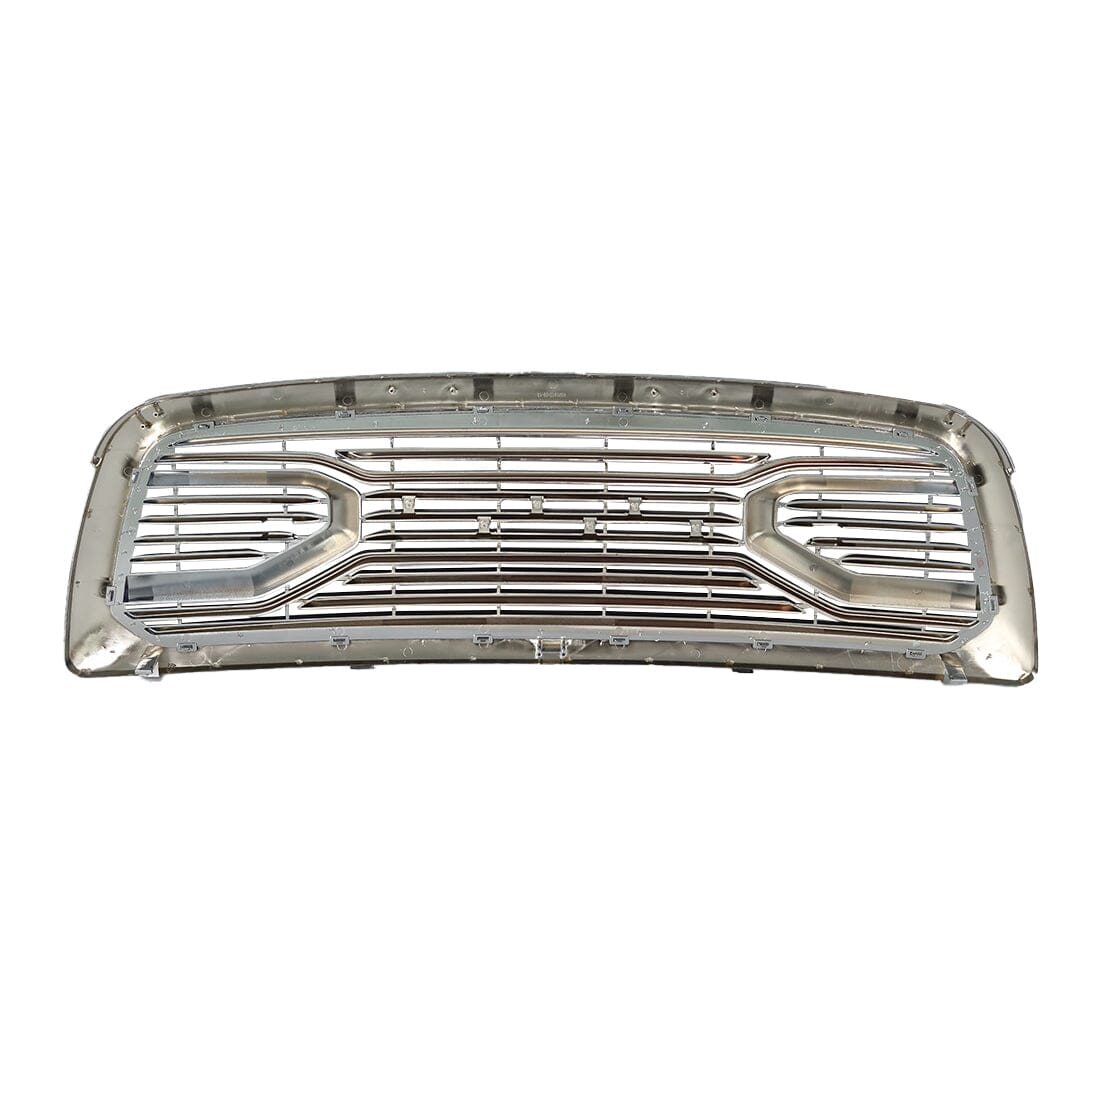 Chrome Big Horn Style Front Grille W/Amber For 2009-2013 Dodge Ram 1500| Amoffroad